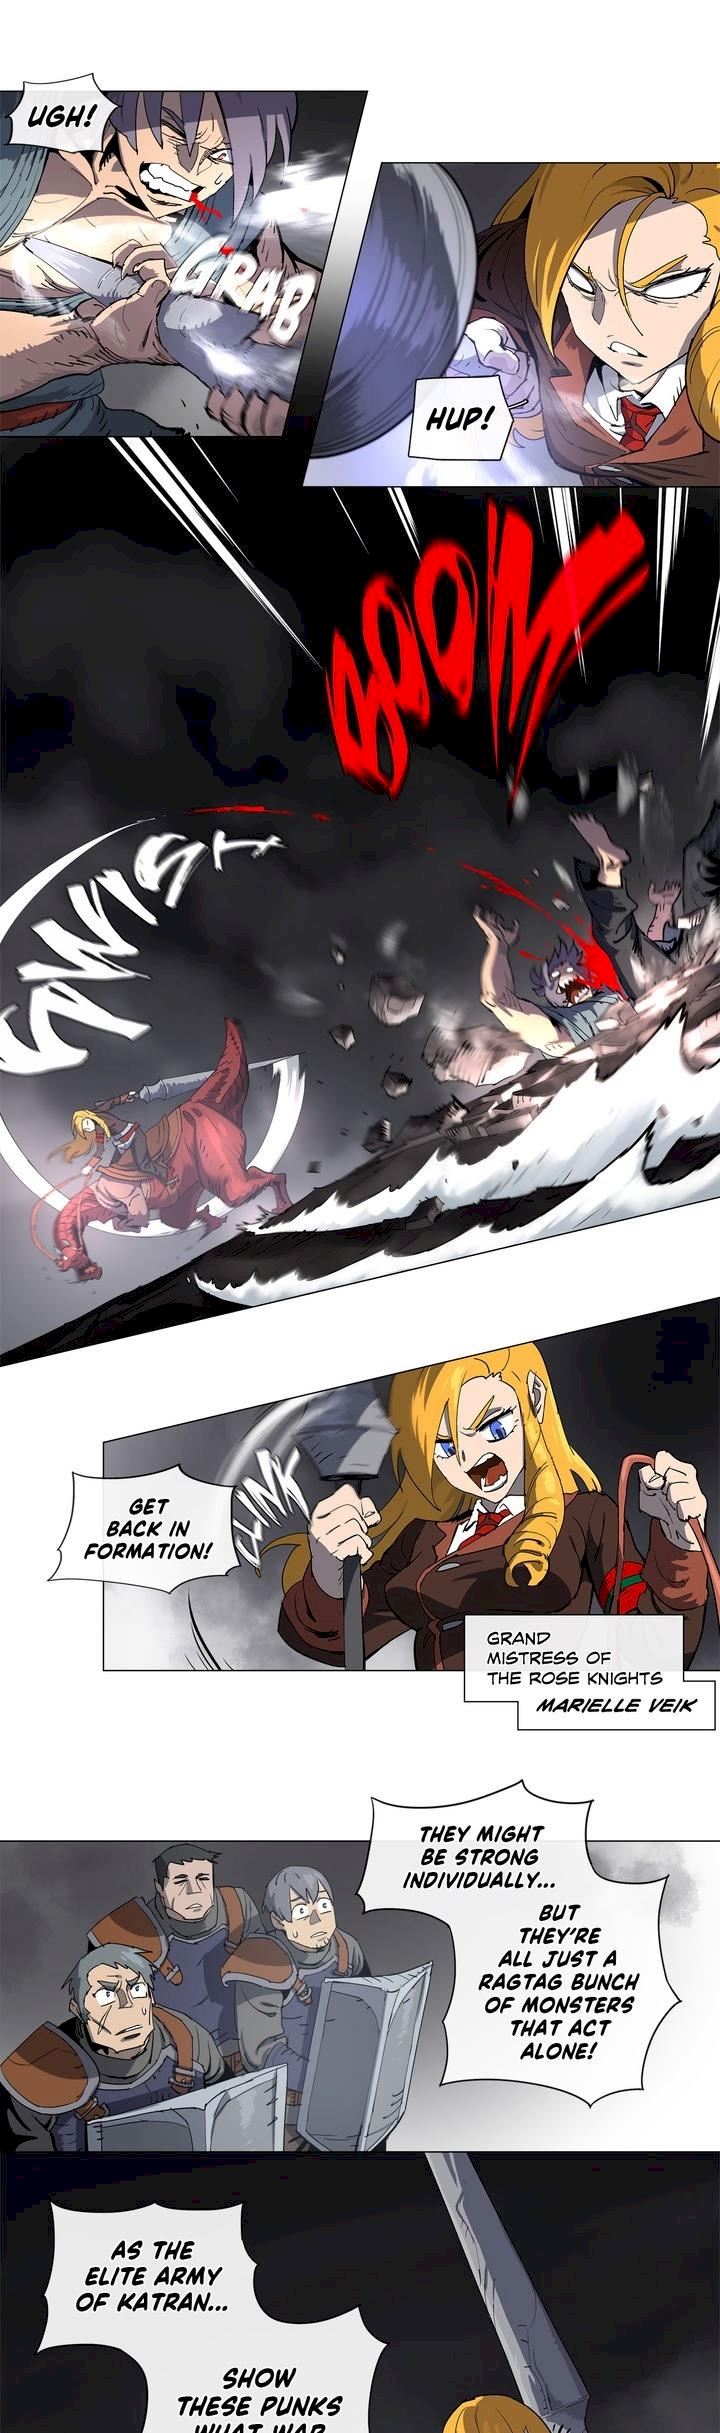 4 Cut Hero - Chapter 130 Page 7